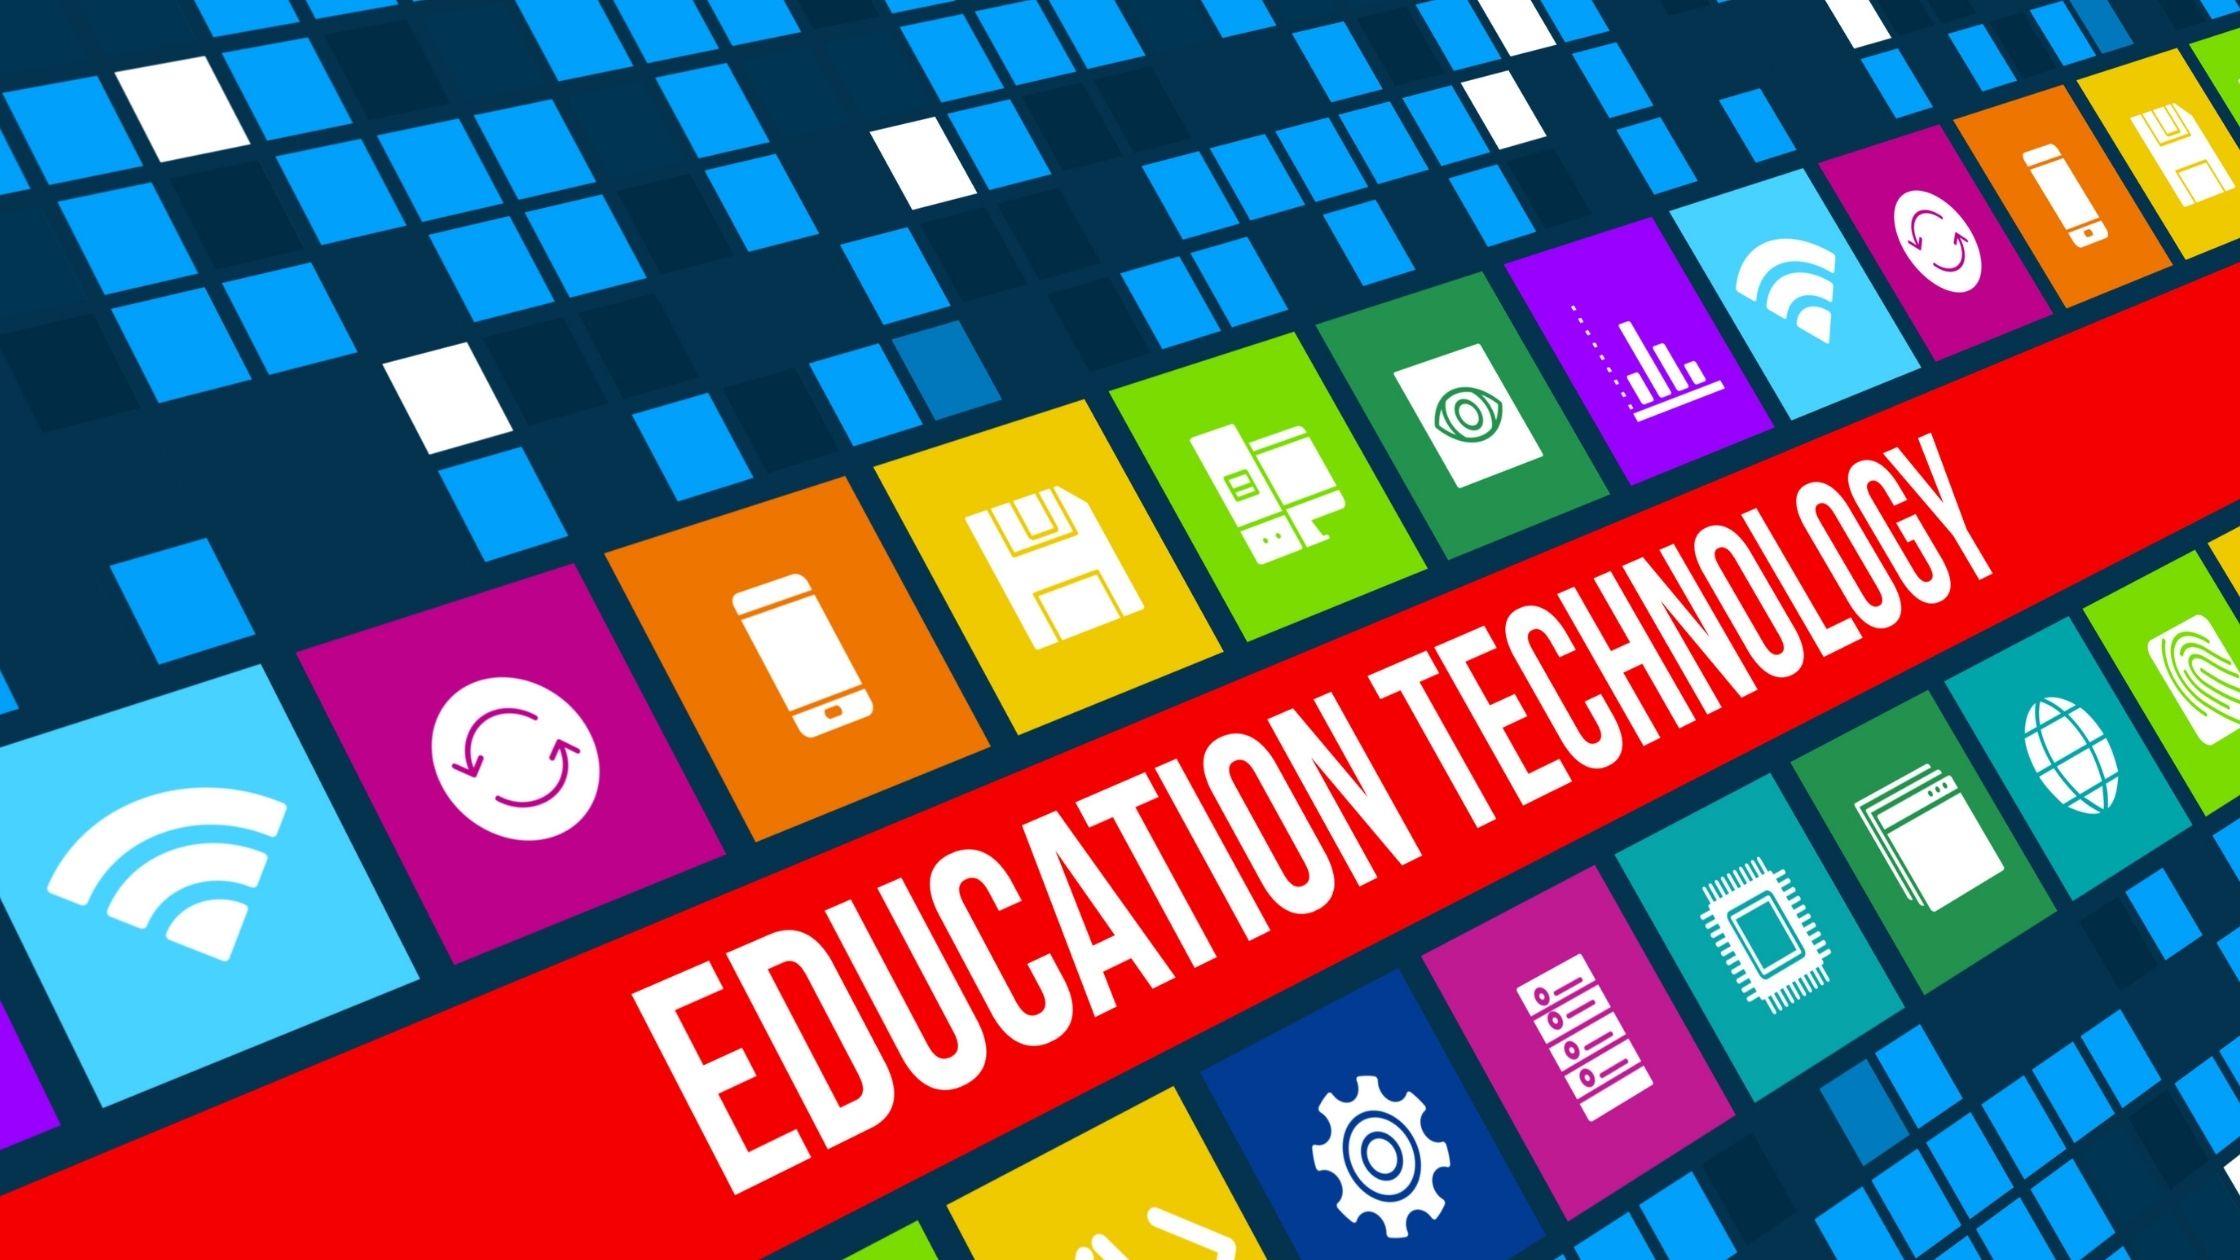 technology in education topics